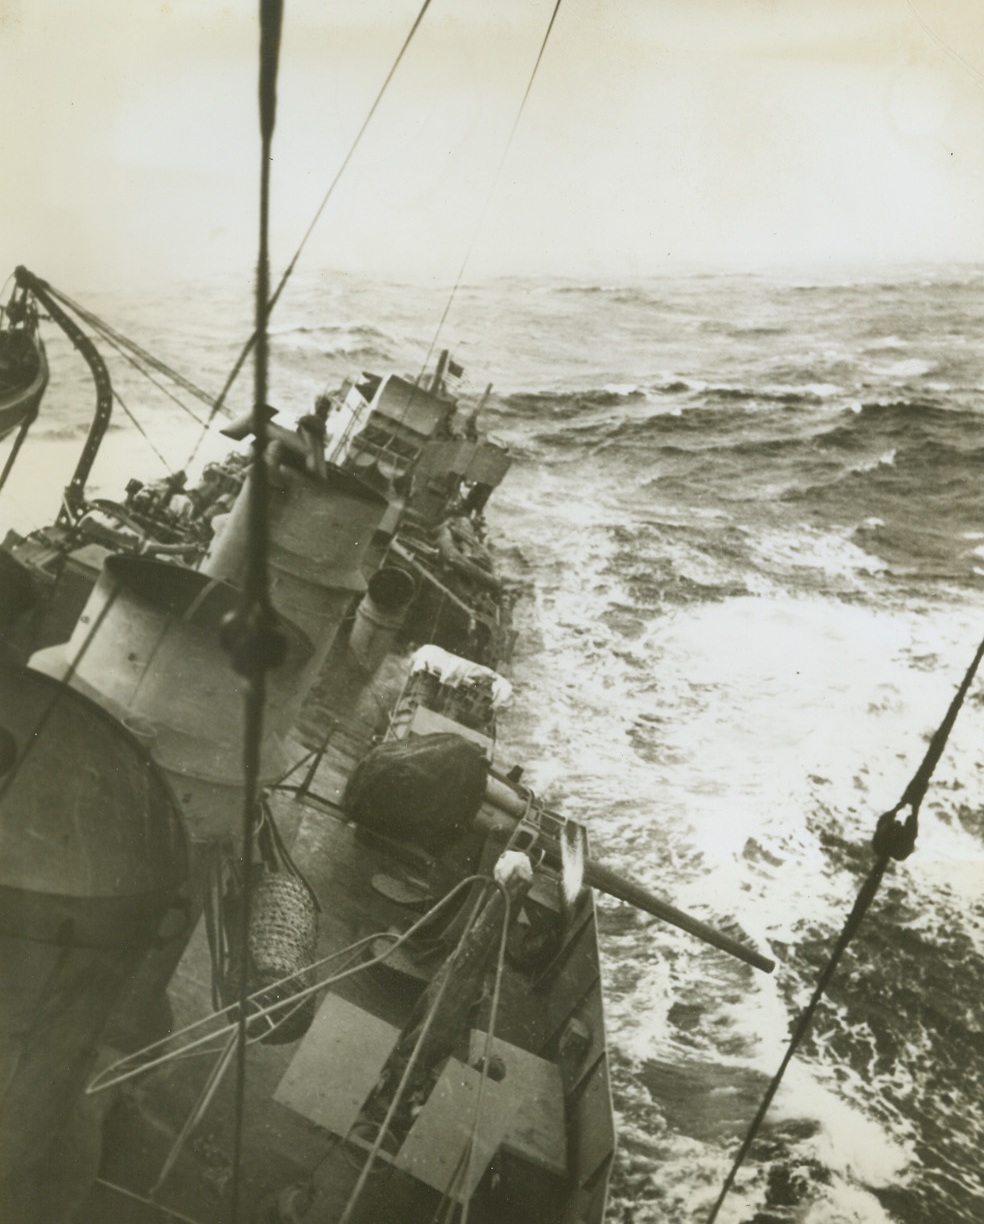 Decks Awash, 6/10/1943. Somewhere in the North Atlantic—No need to swab the decks today—for a rough sea is doing an efficient washing job on this U.S. destroyer as it makes its way across the North Atlantic in heavy weather. The naval vessel escorted a United Nations convoy through rough, sub-infested seas. Credit: Official U.S. Navy photo from ACME.;